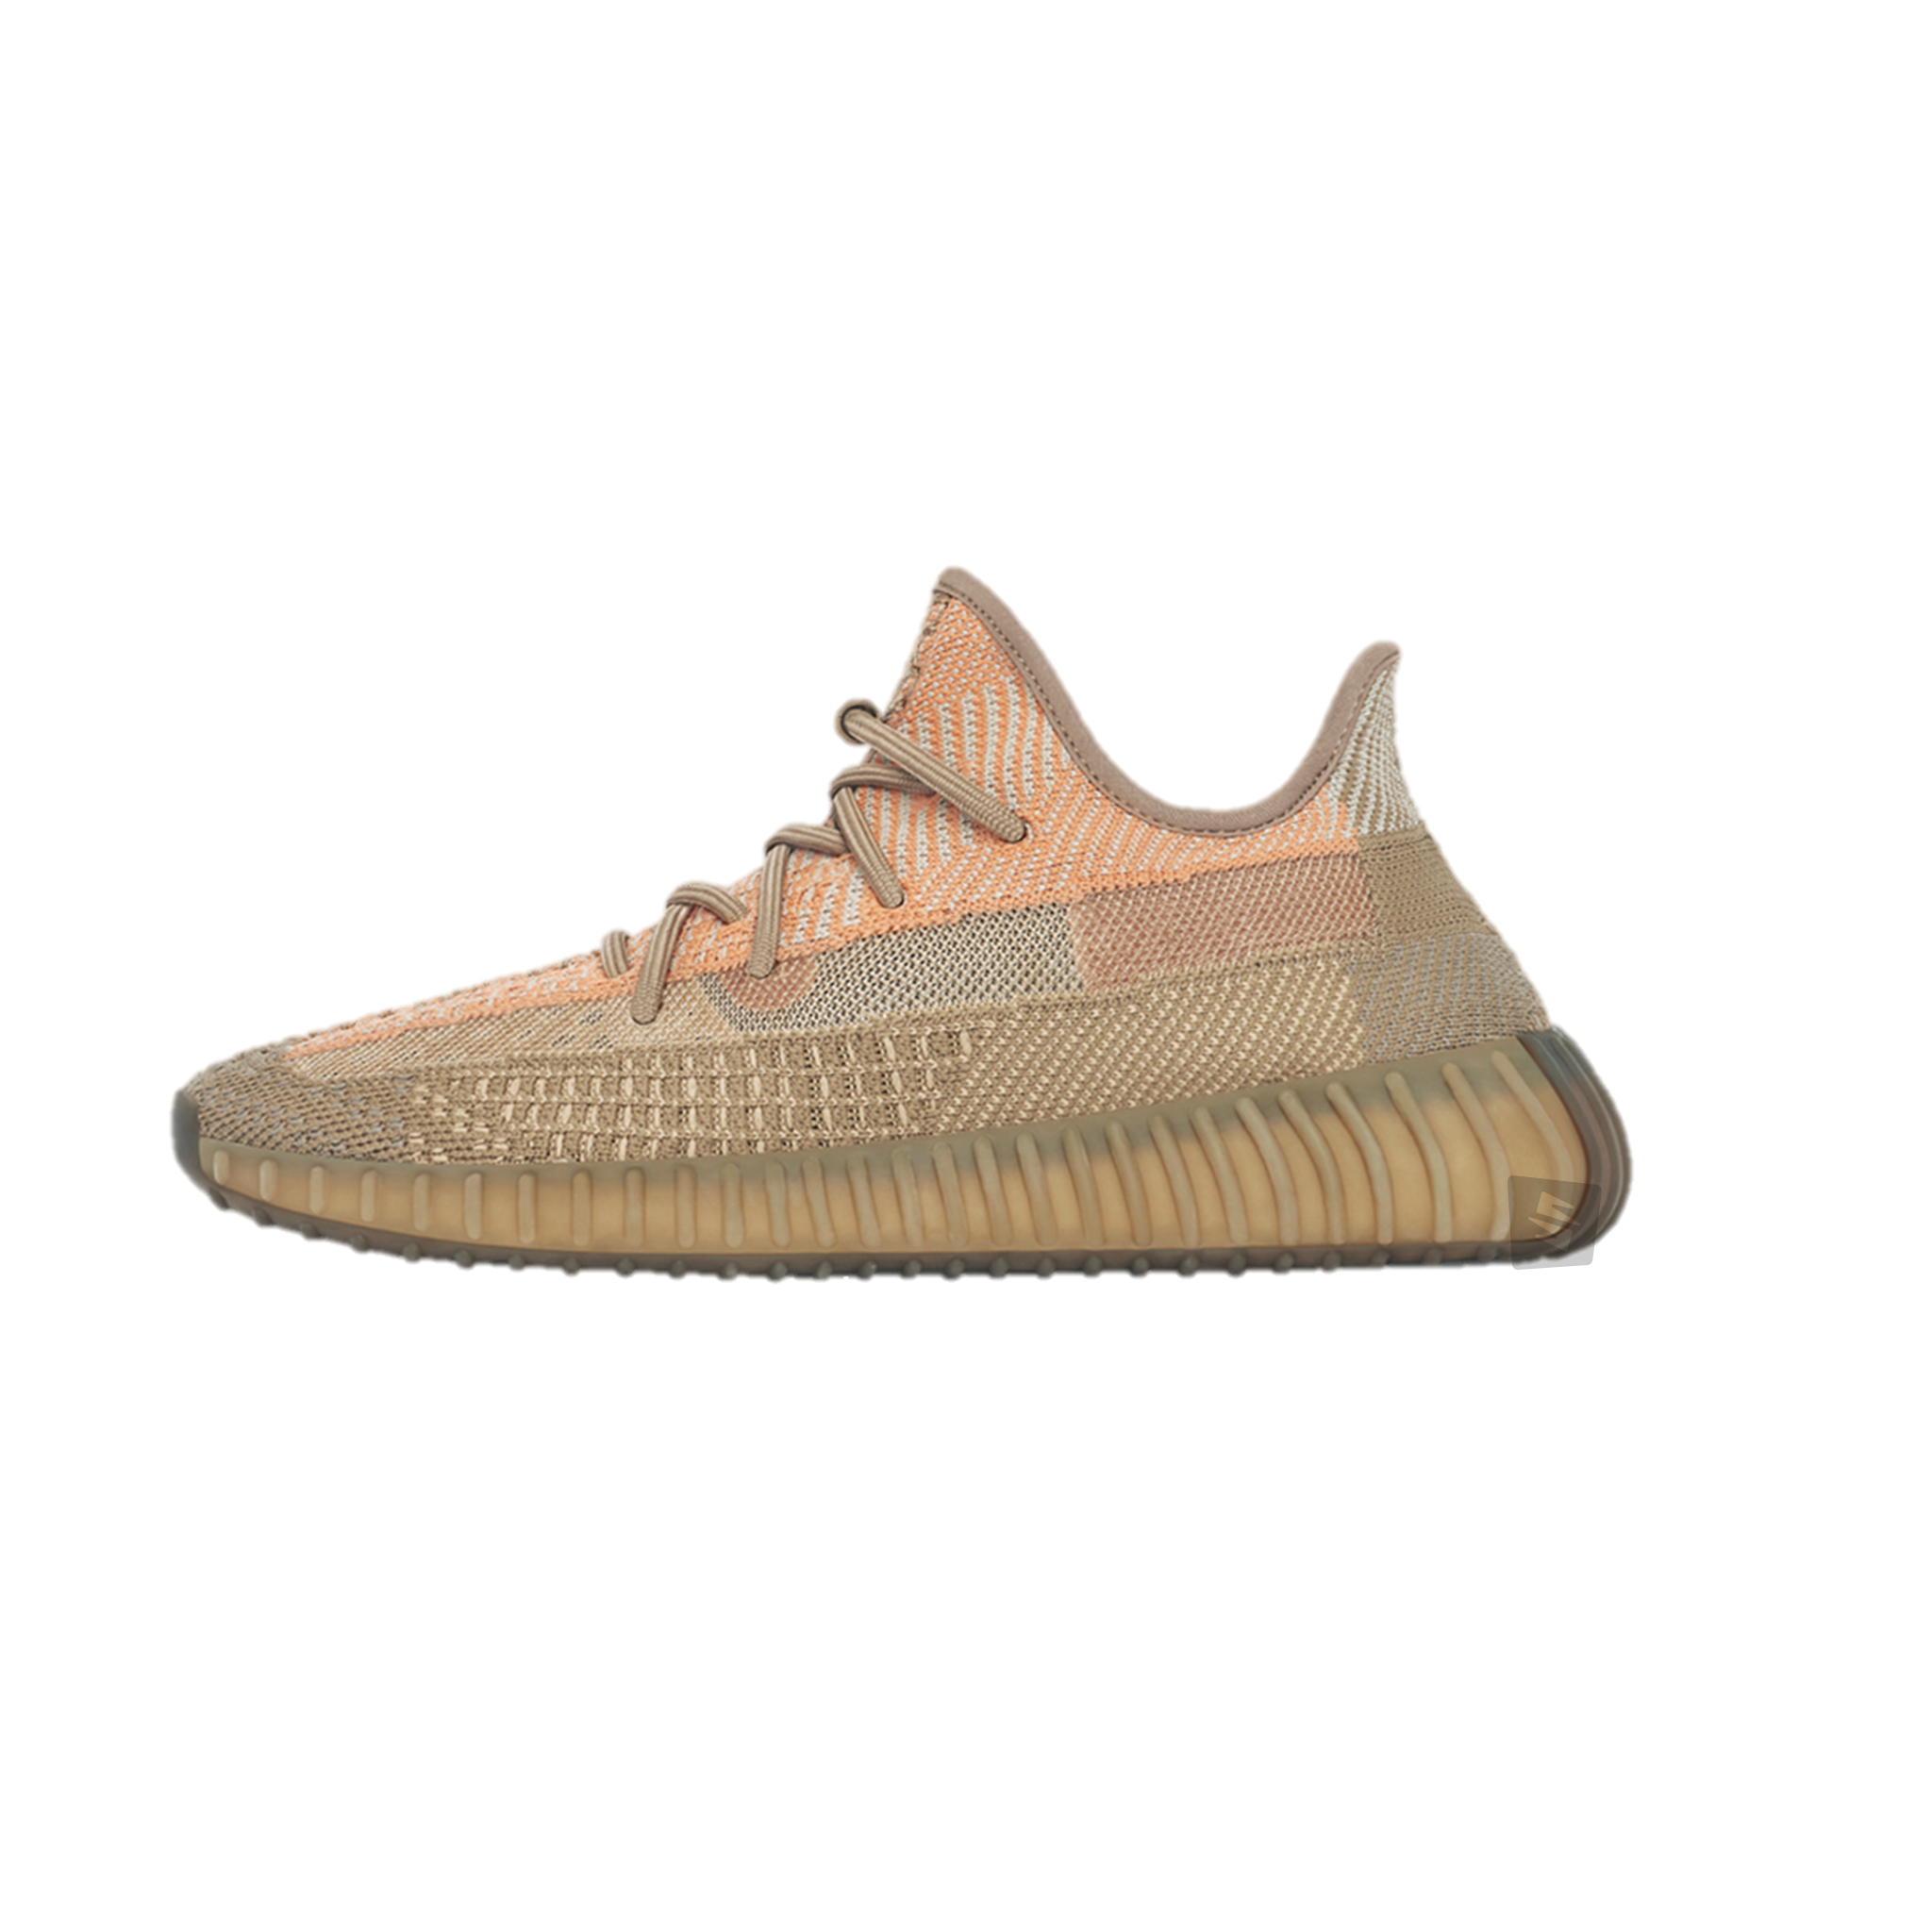 where can i get the yeezy boost 350 v2